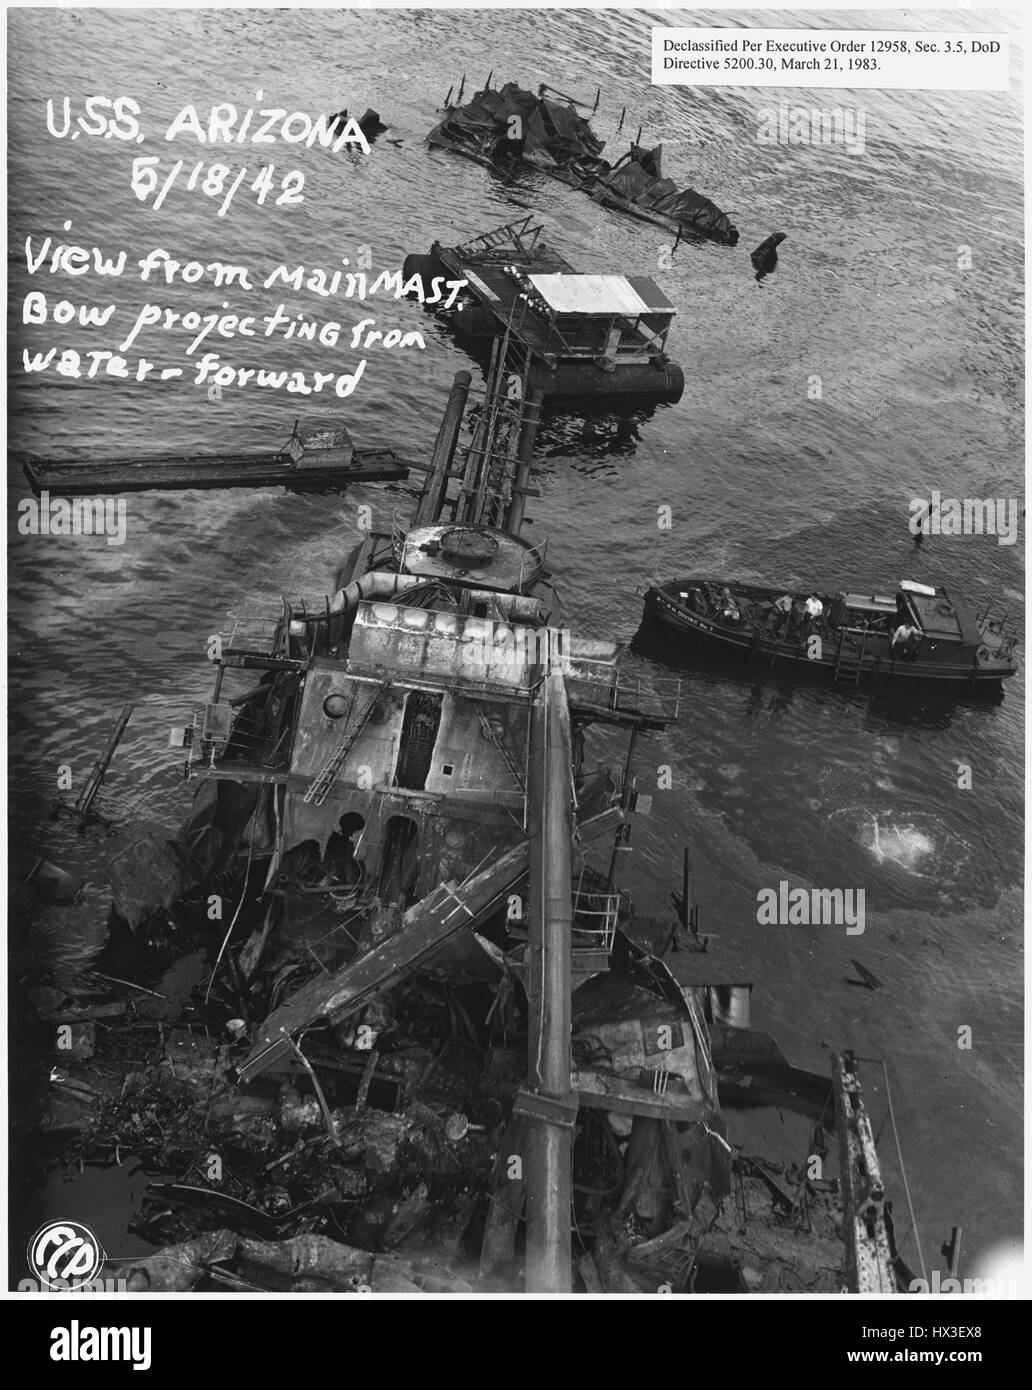 View of USS Arizona from the main mast with bow projecting from the water, May 18, 1942. Image courtesy National Archives. Stock Photo